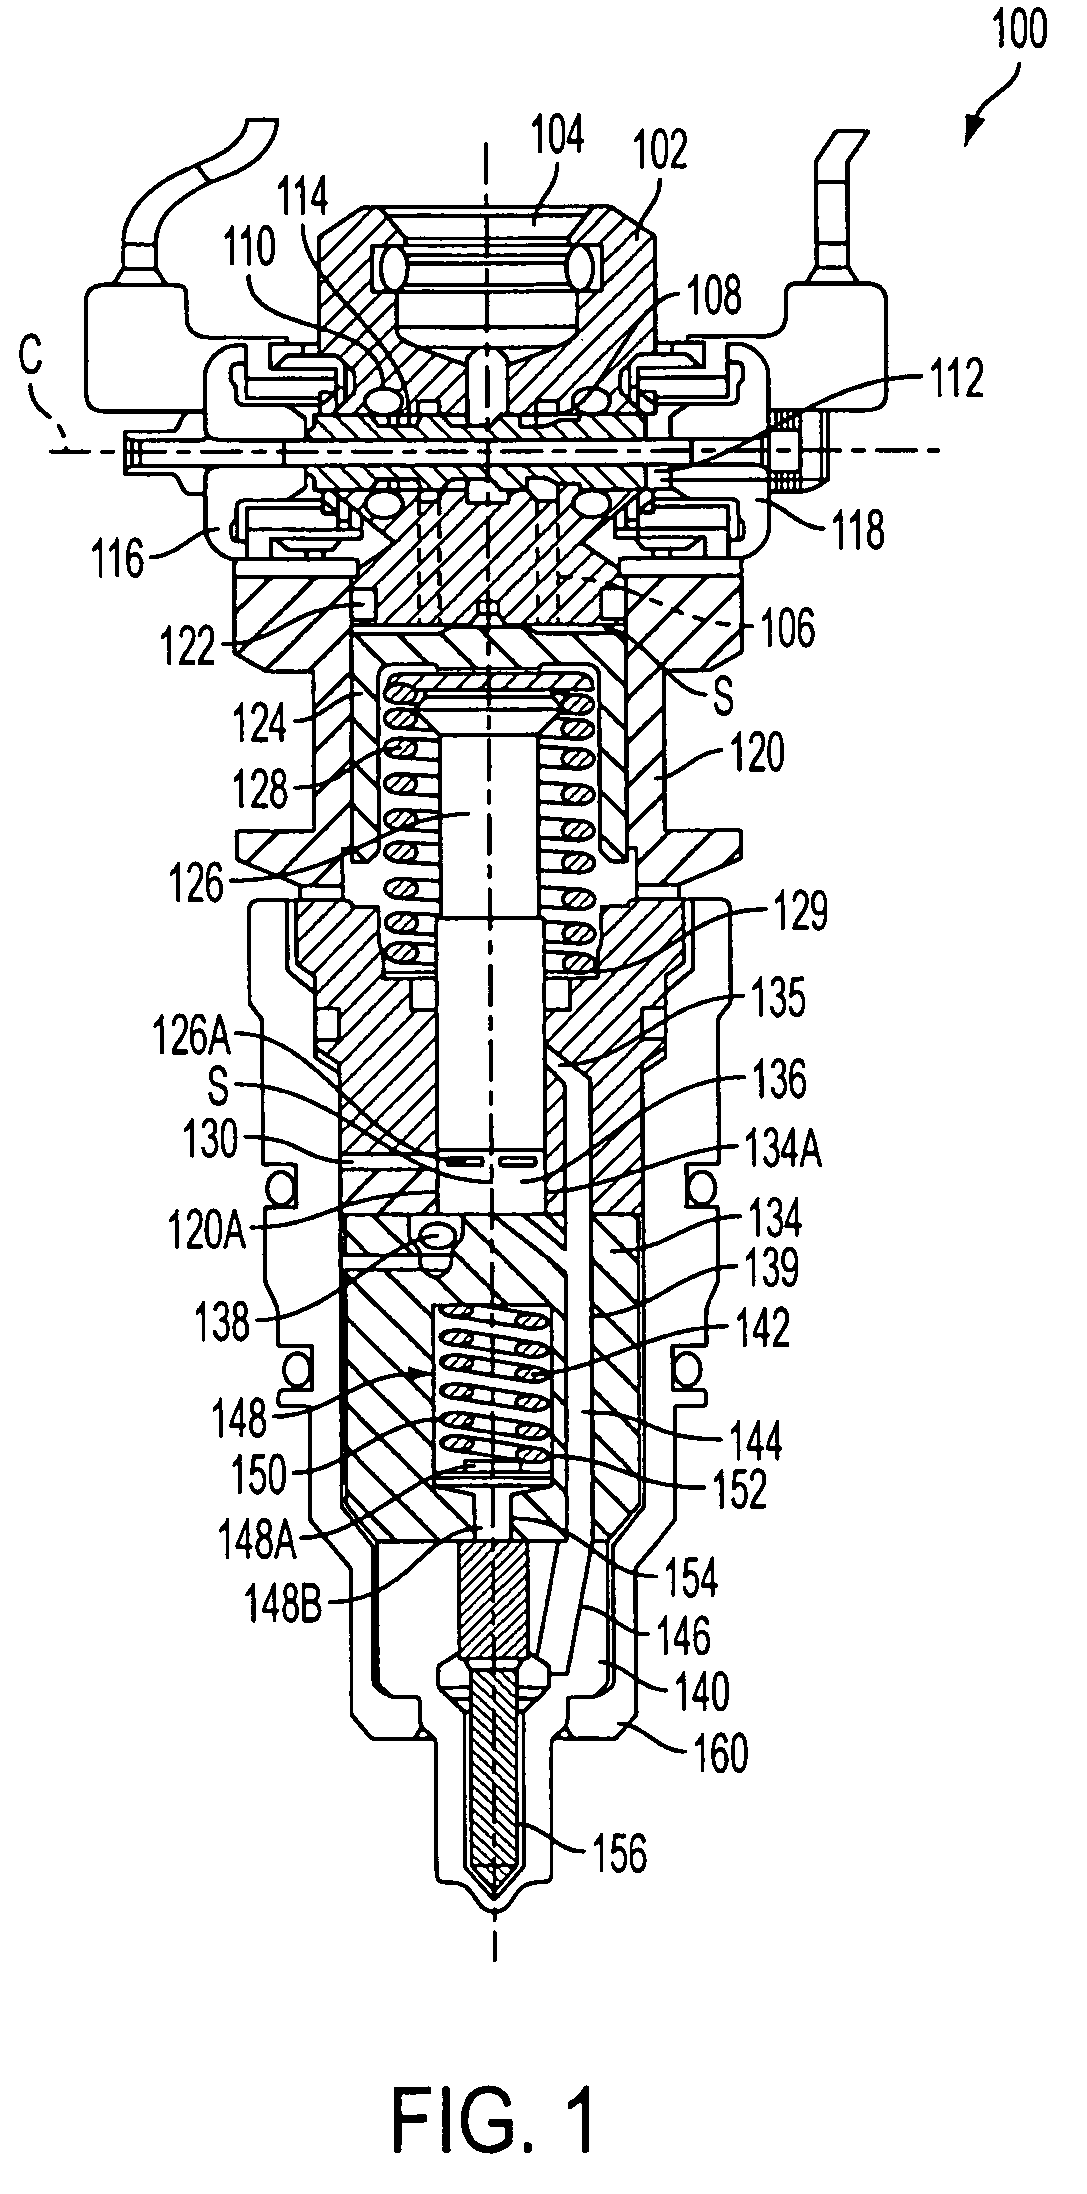 Control method for closed loop operation with adaptive wave form of an engine fuel injector oil or fuel control valve